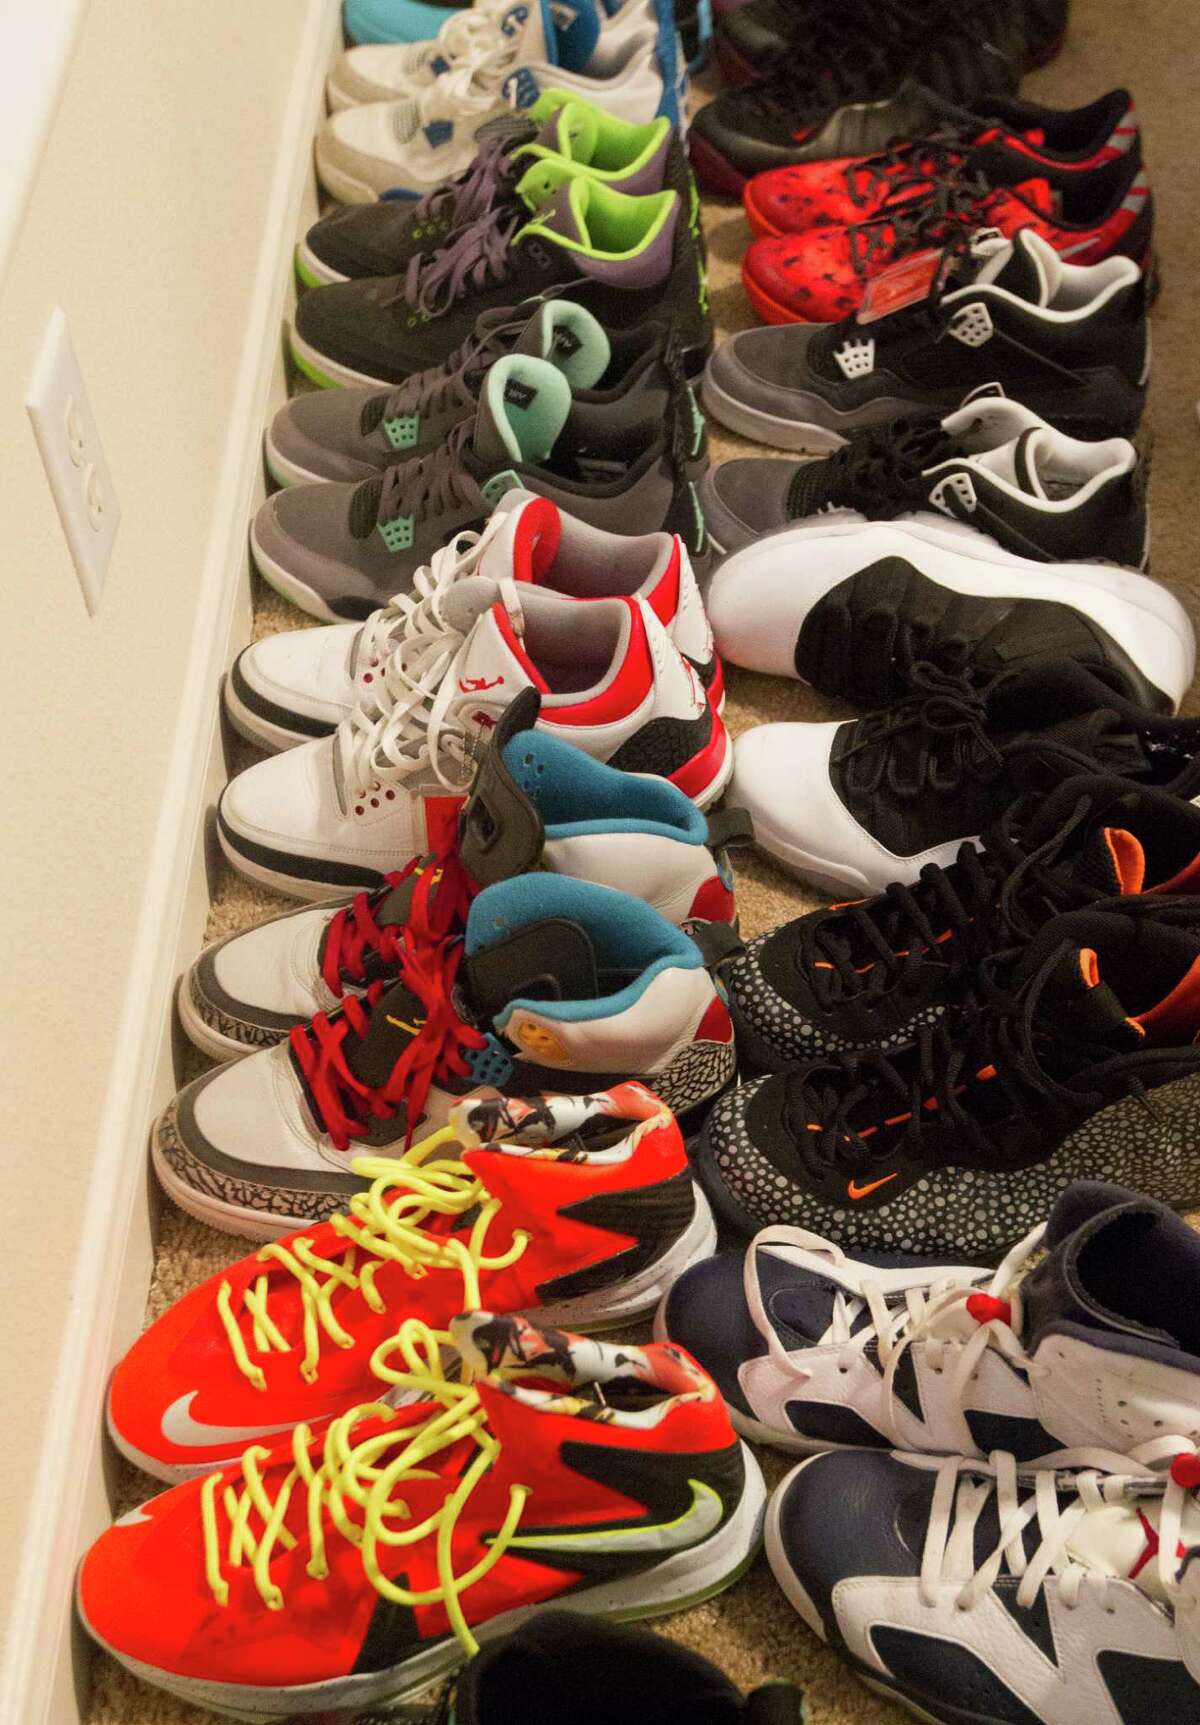 Demetri Goodson's one concession to personal flash is the 200 pairs of high-end basketball shoes he owns.